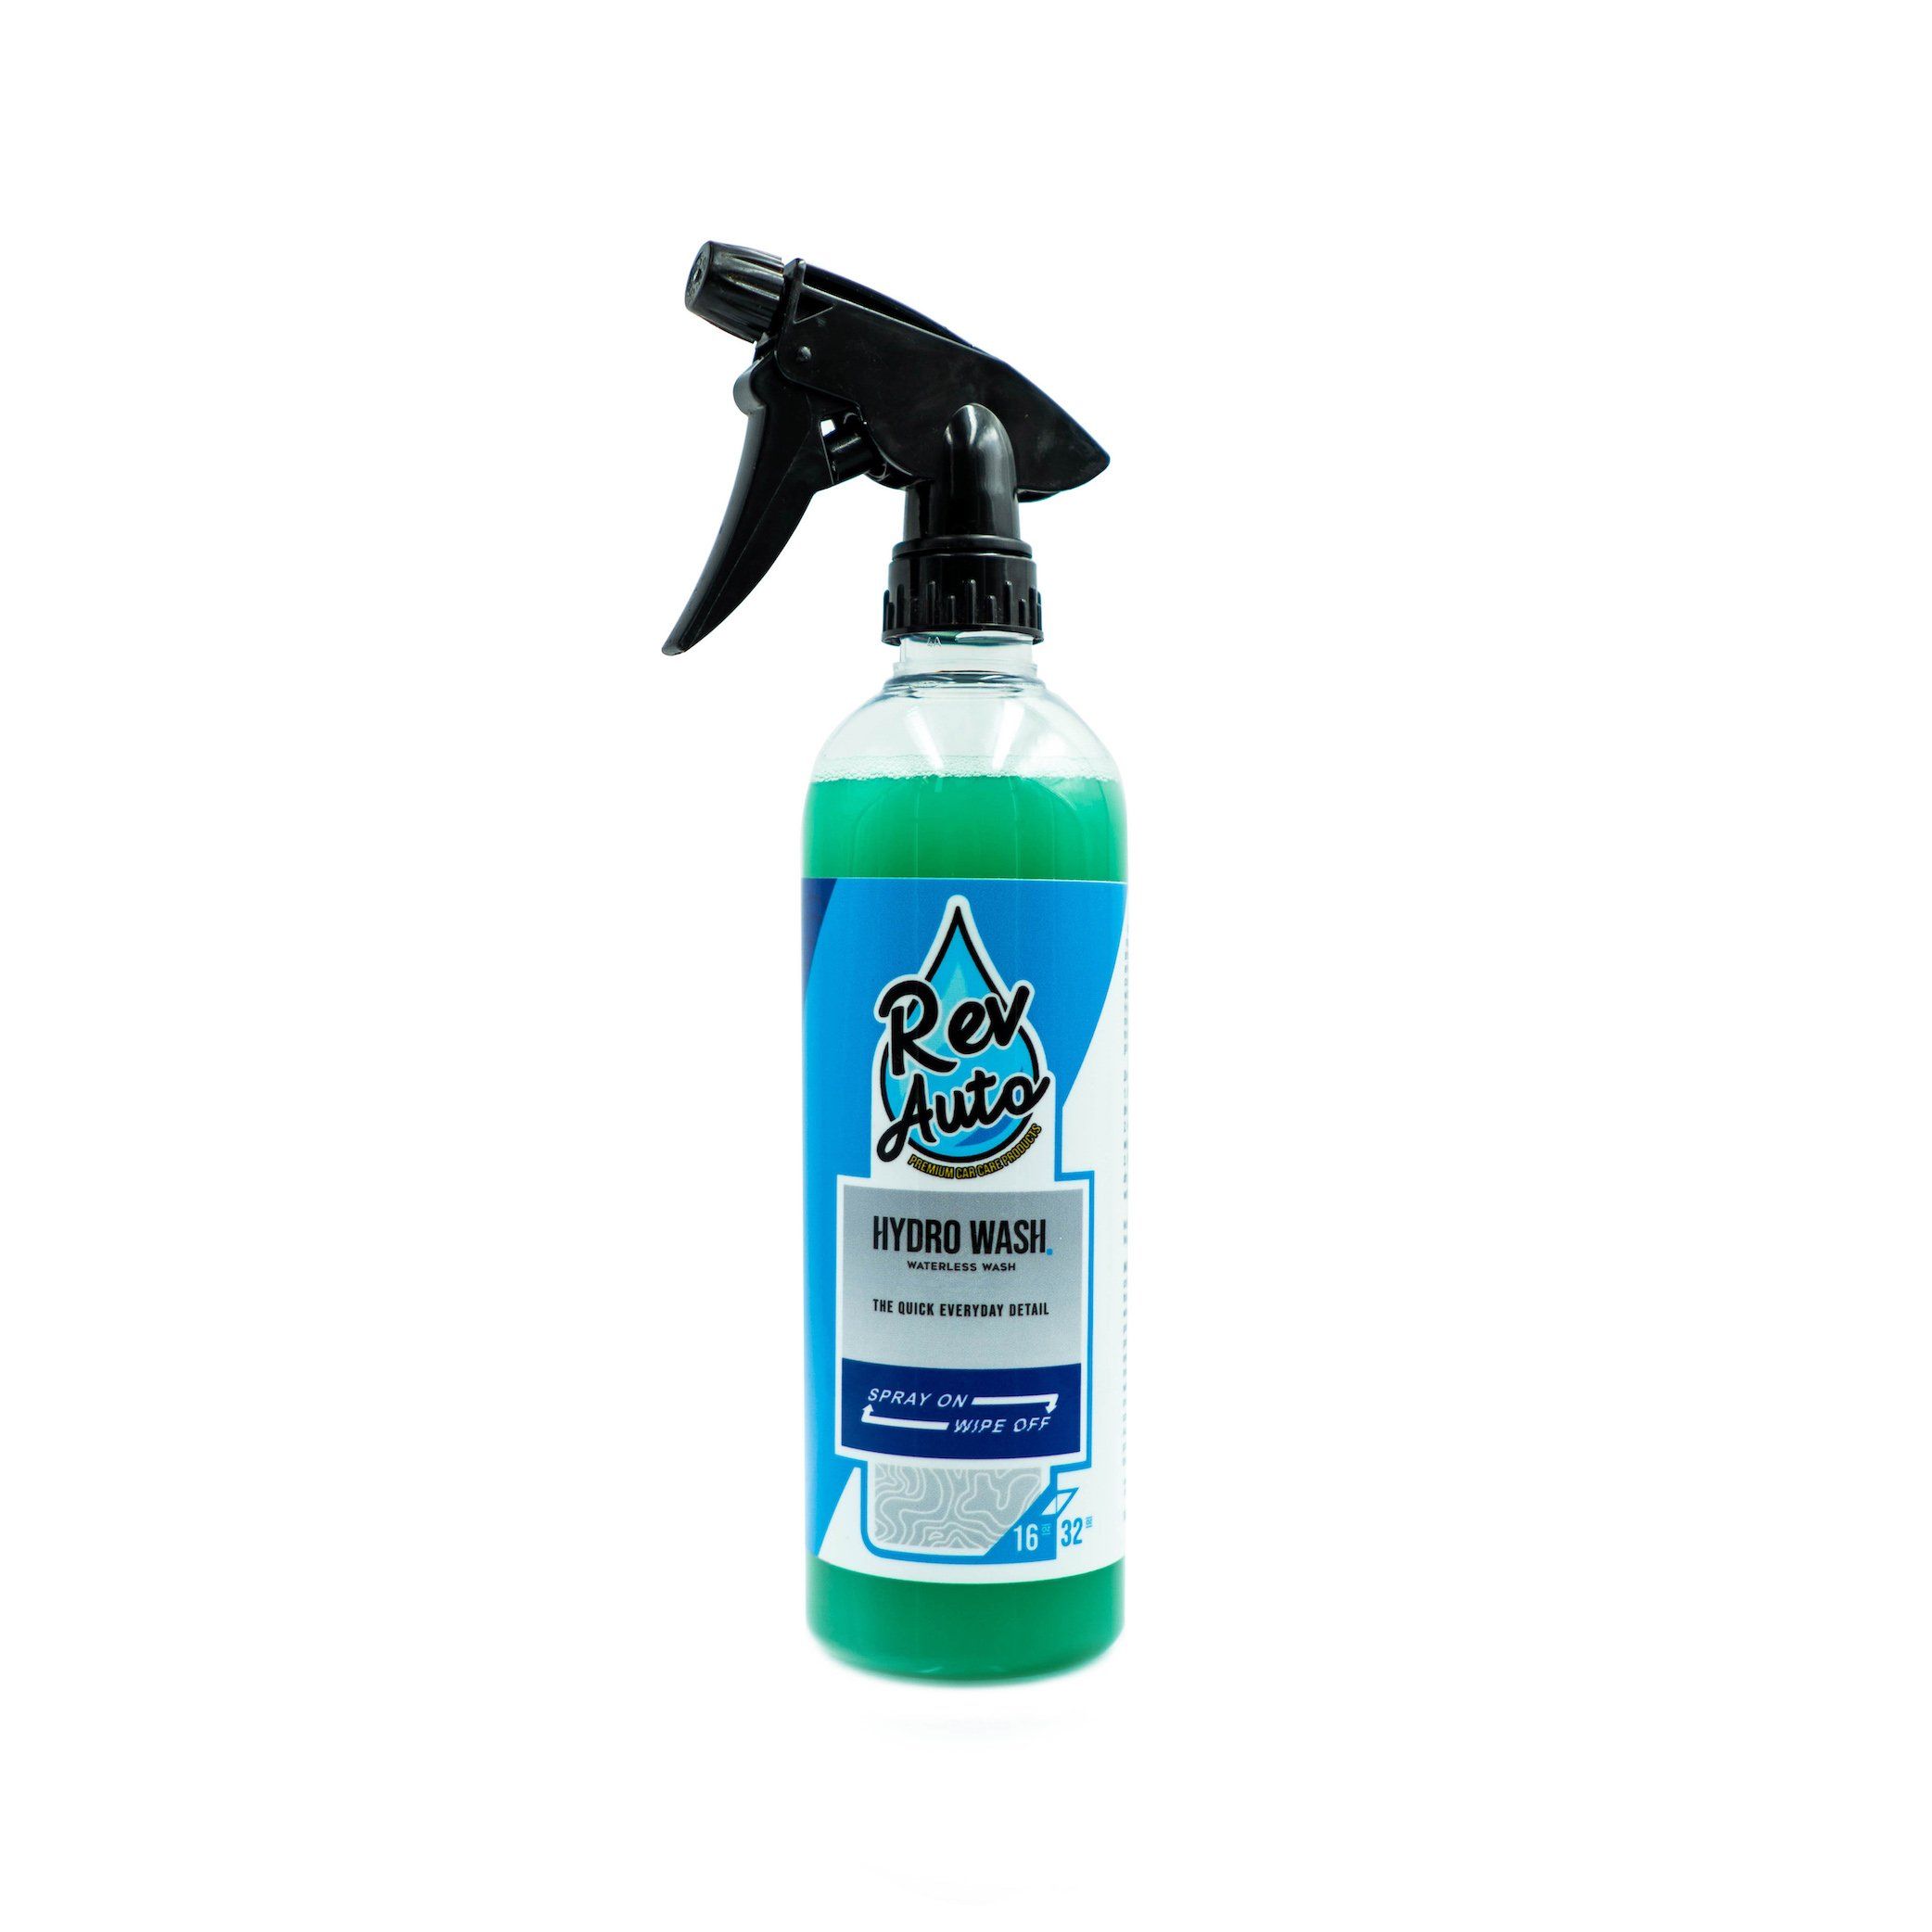 Rev Auto Waterless Car Wash Spray - Cleans Any Vehicle Without A Water Source/No Rinse Car Wash/Waterless Car Cleaner That Cleans Car Exterior